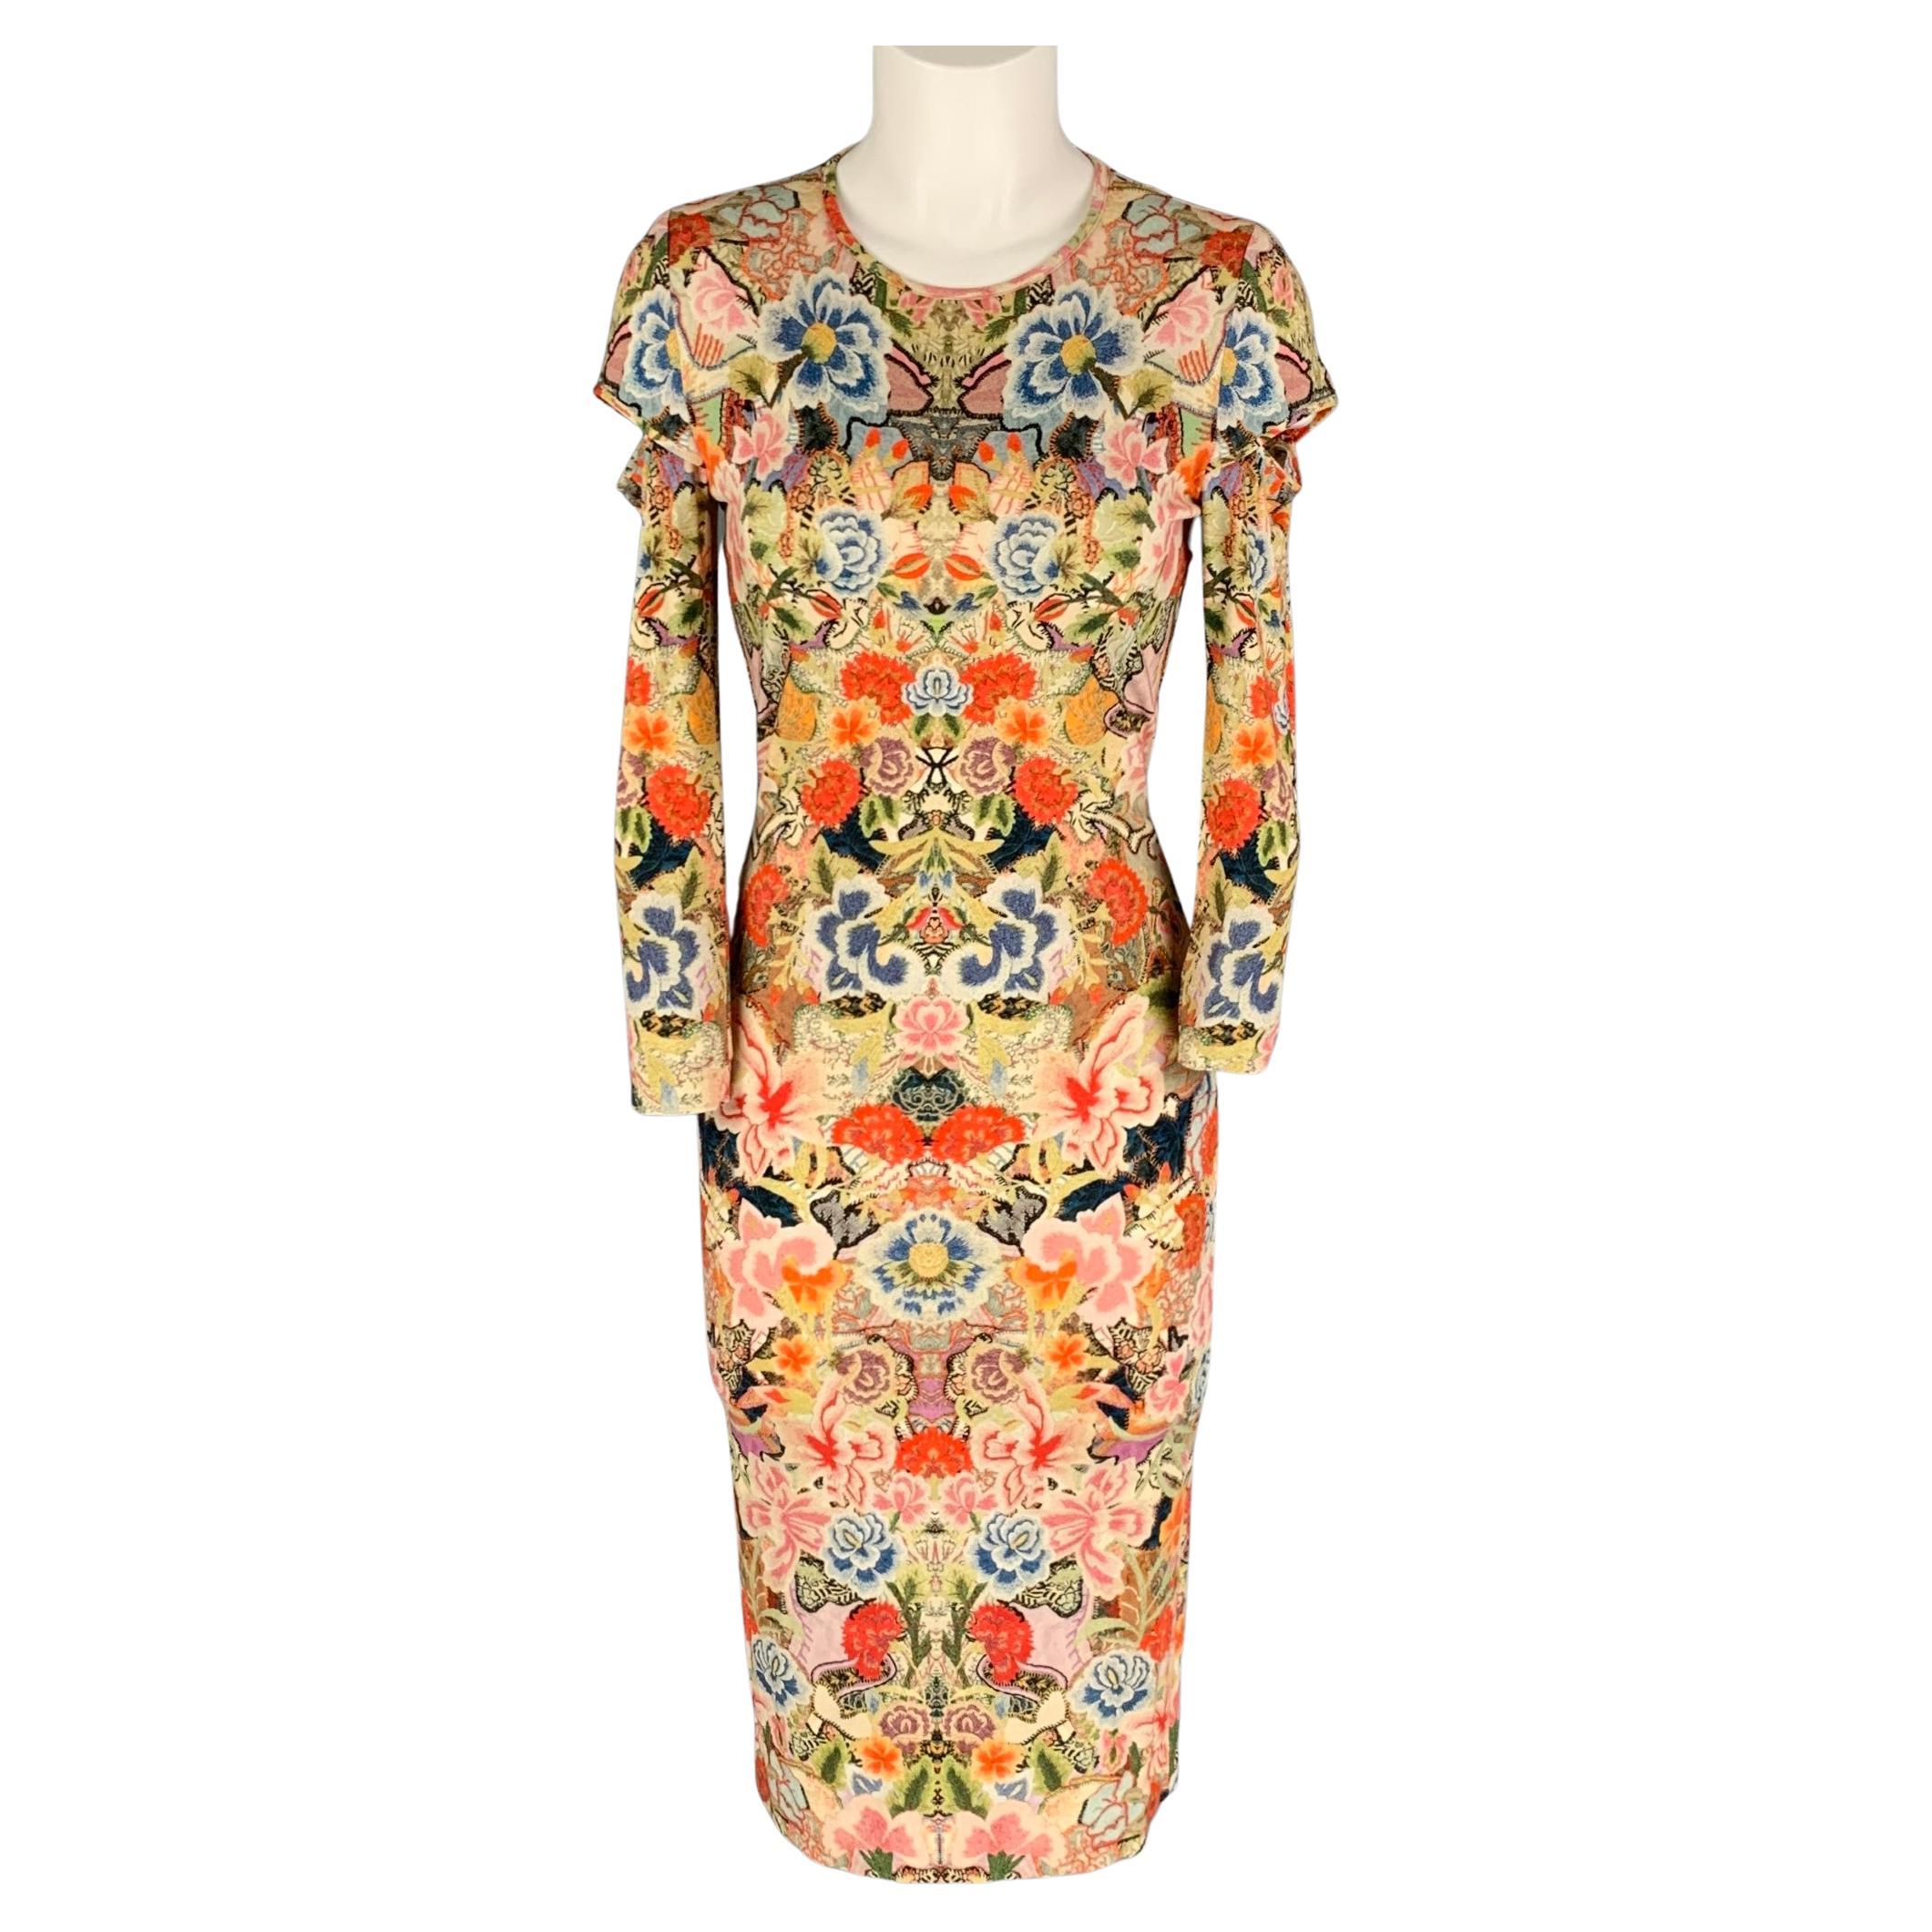 ALEXANDER MCQUEEN Size 4 Multi-Color Abstract Floral Rayon Blend Dress